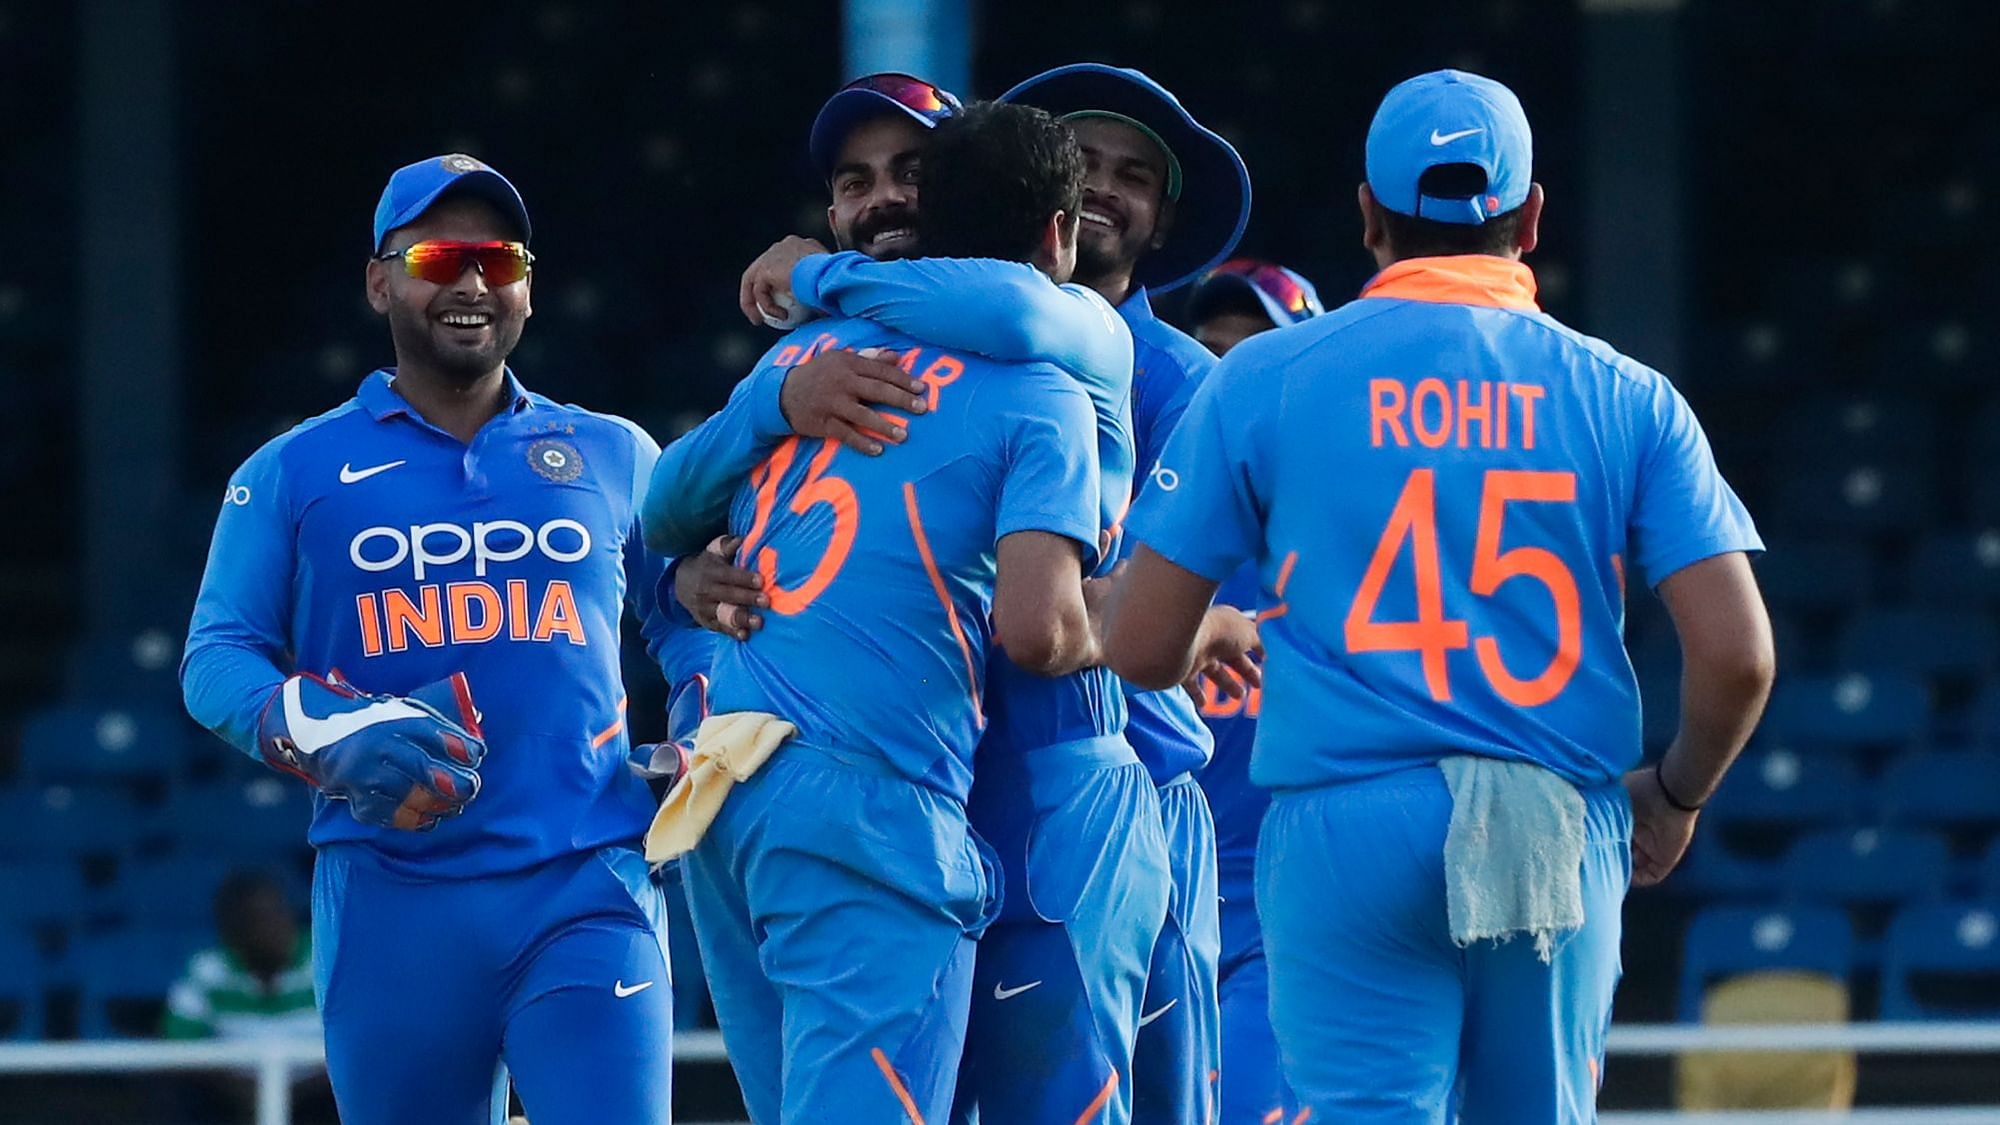 India vs New Zealand ODI Series 2022 Live Streaming and Telecast Online and TV IND vs NZ Date, Time, Tickets, Full Schedule, Squads, and Other Details